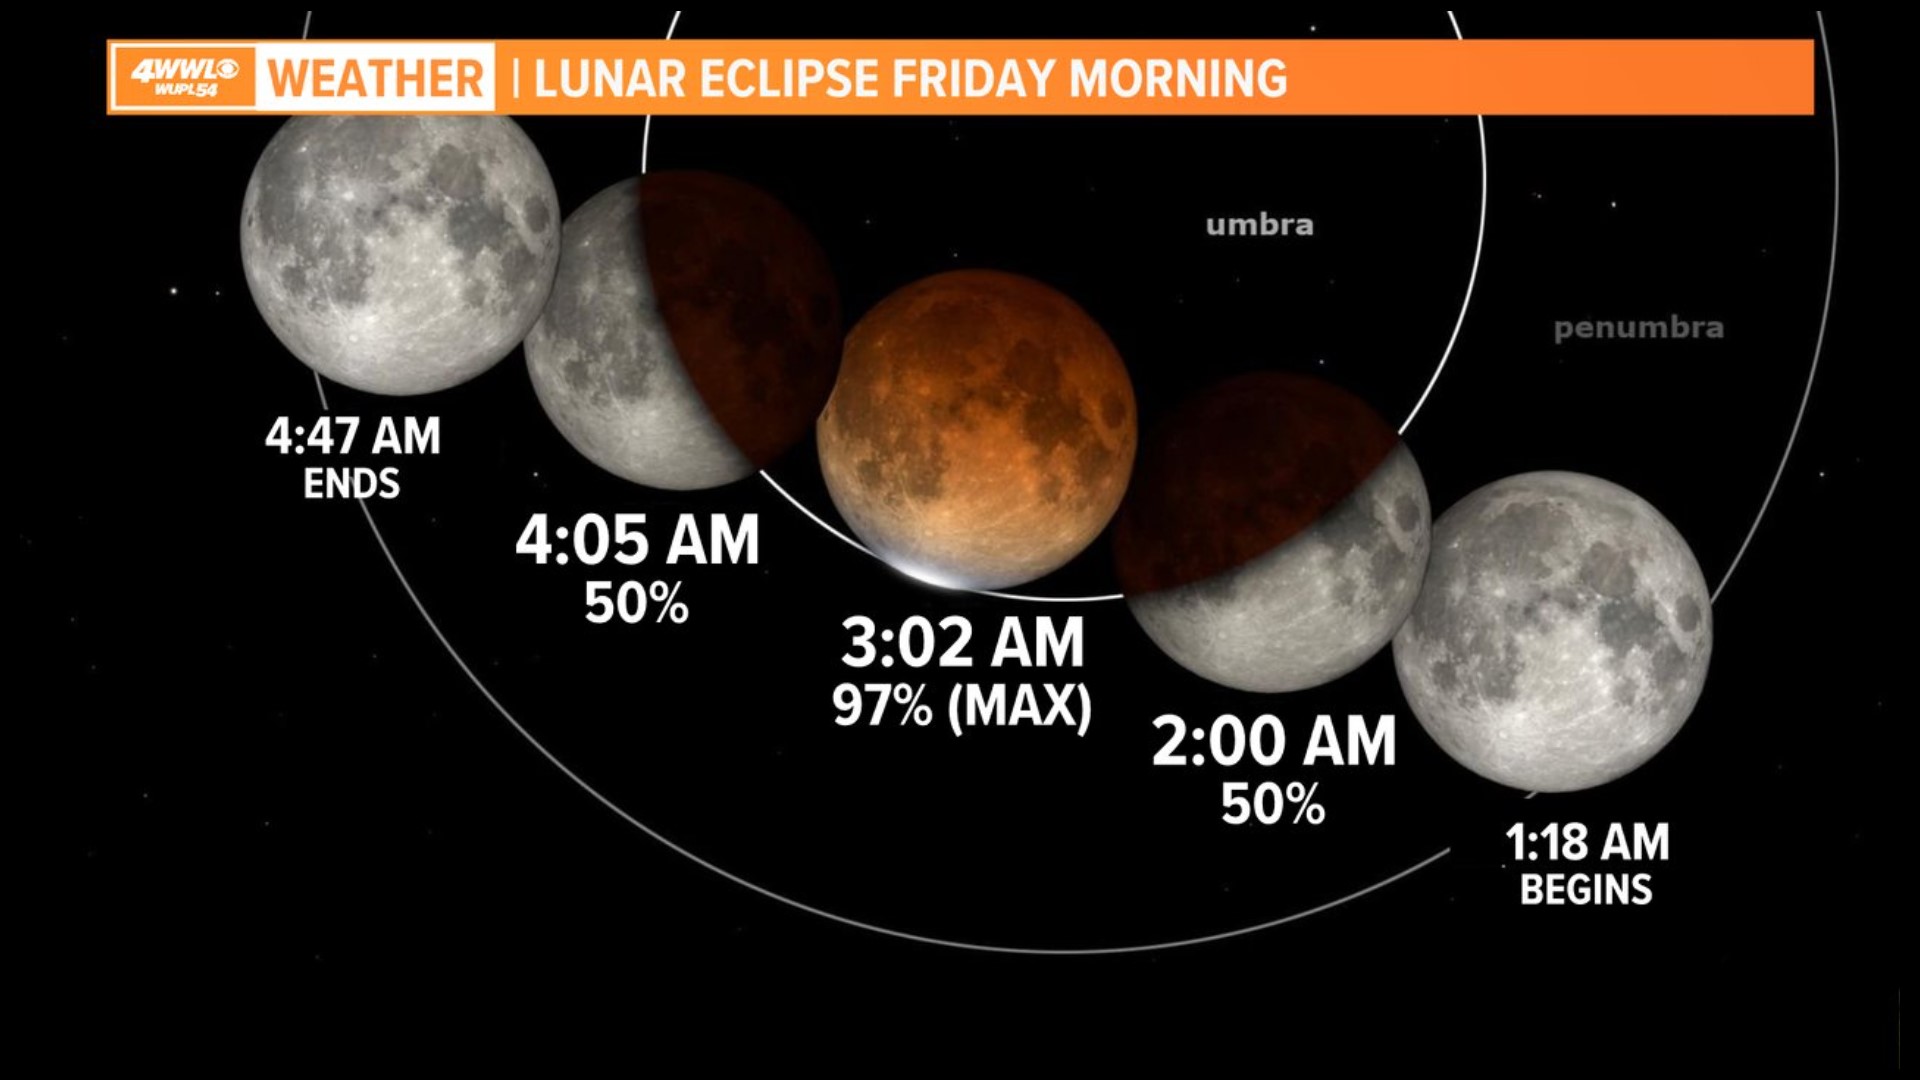 Partial lunar eclipse How to see it in New Orleans, Louisiana